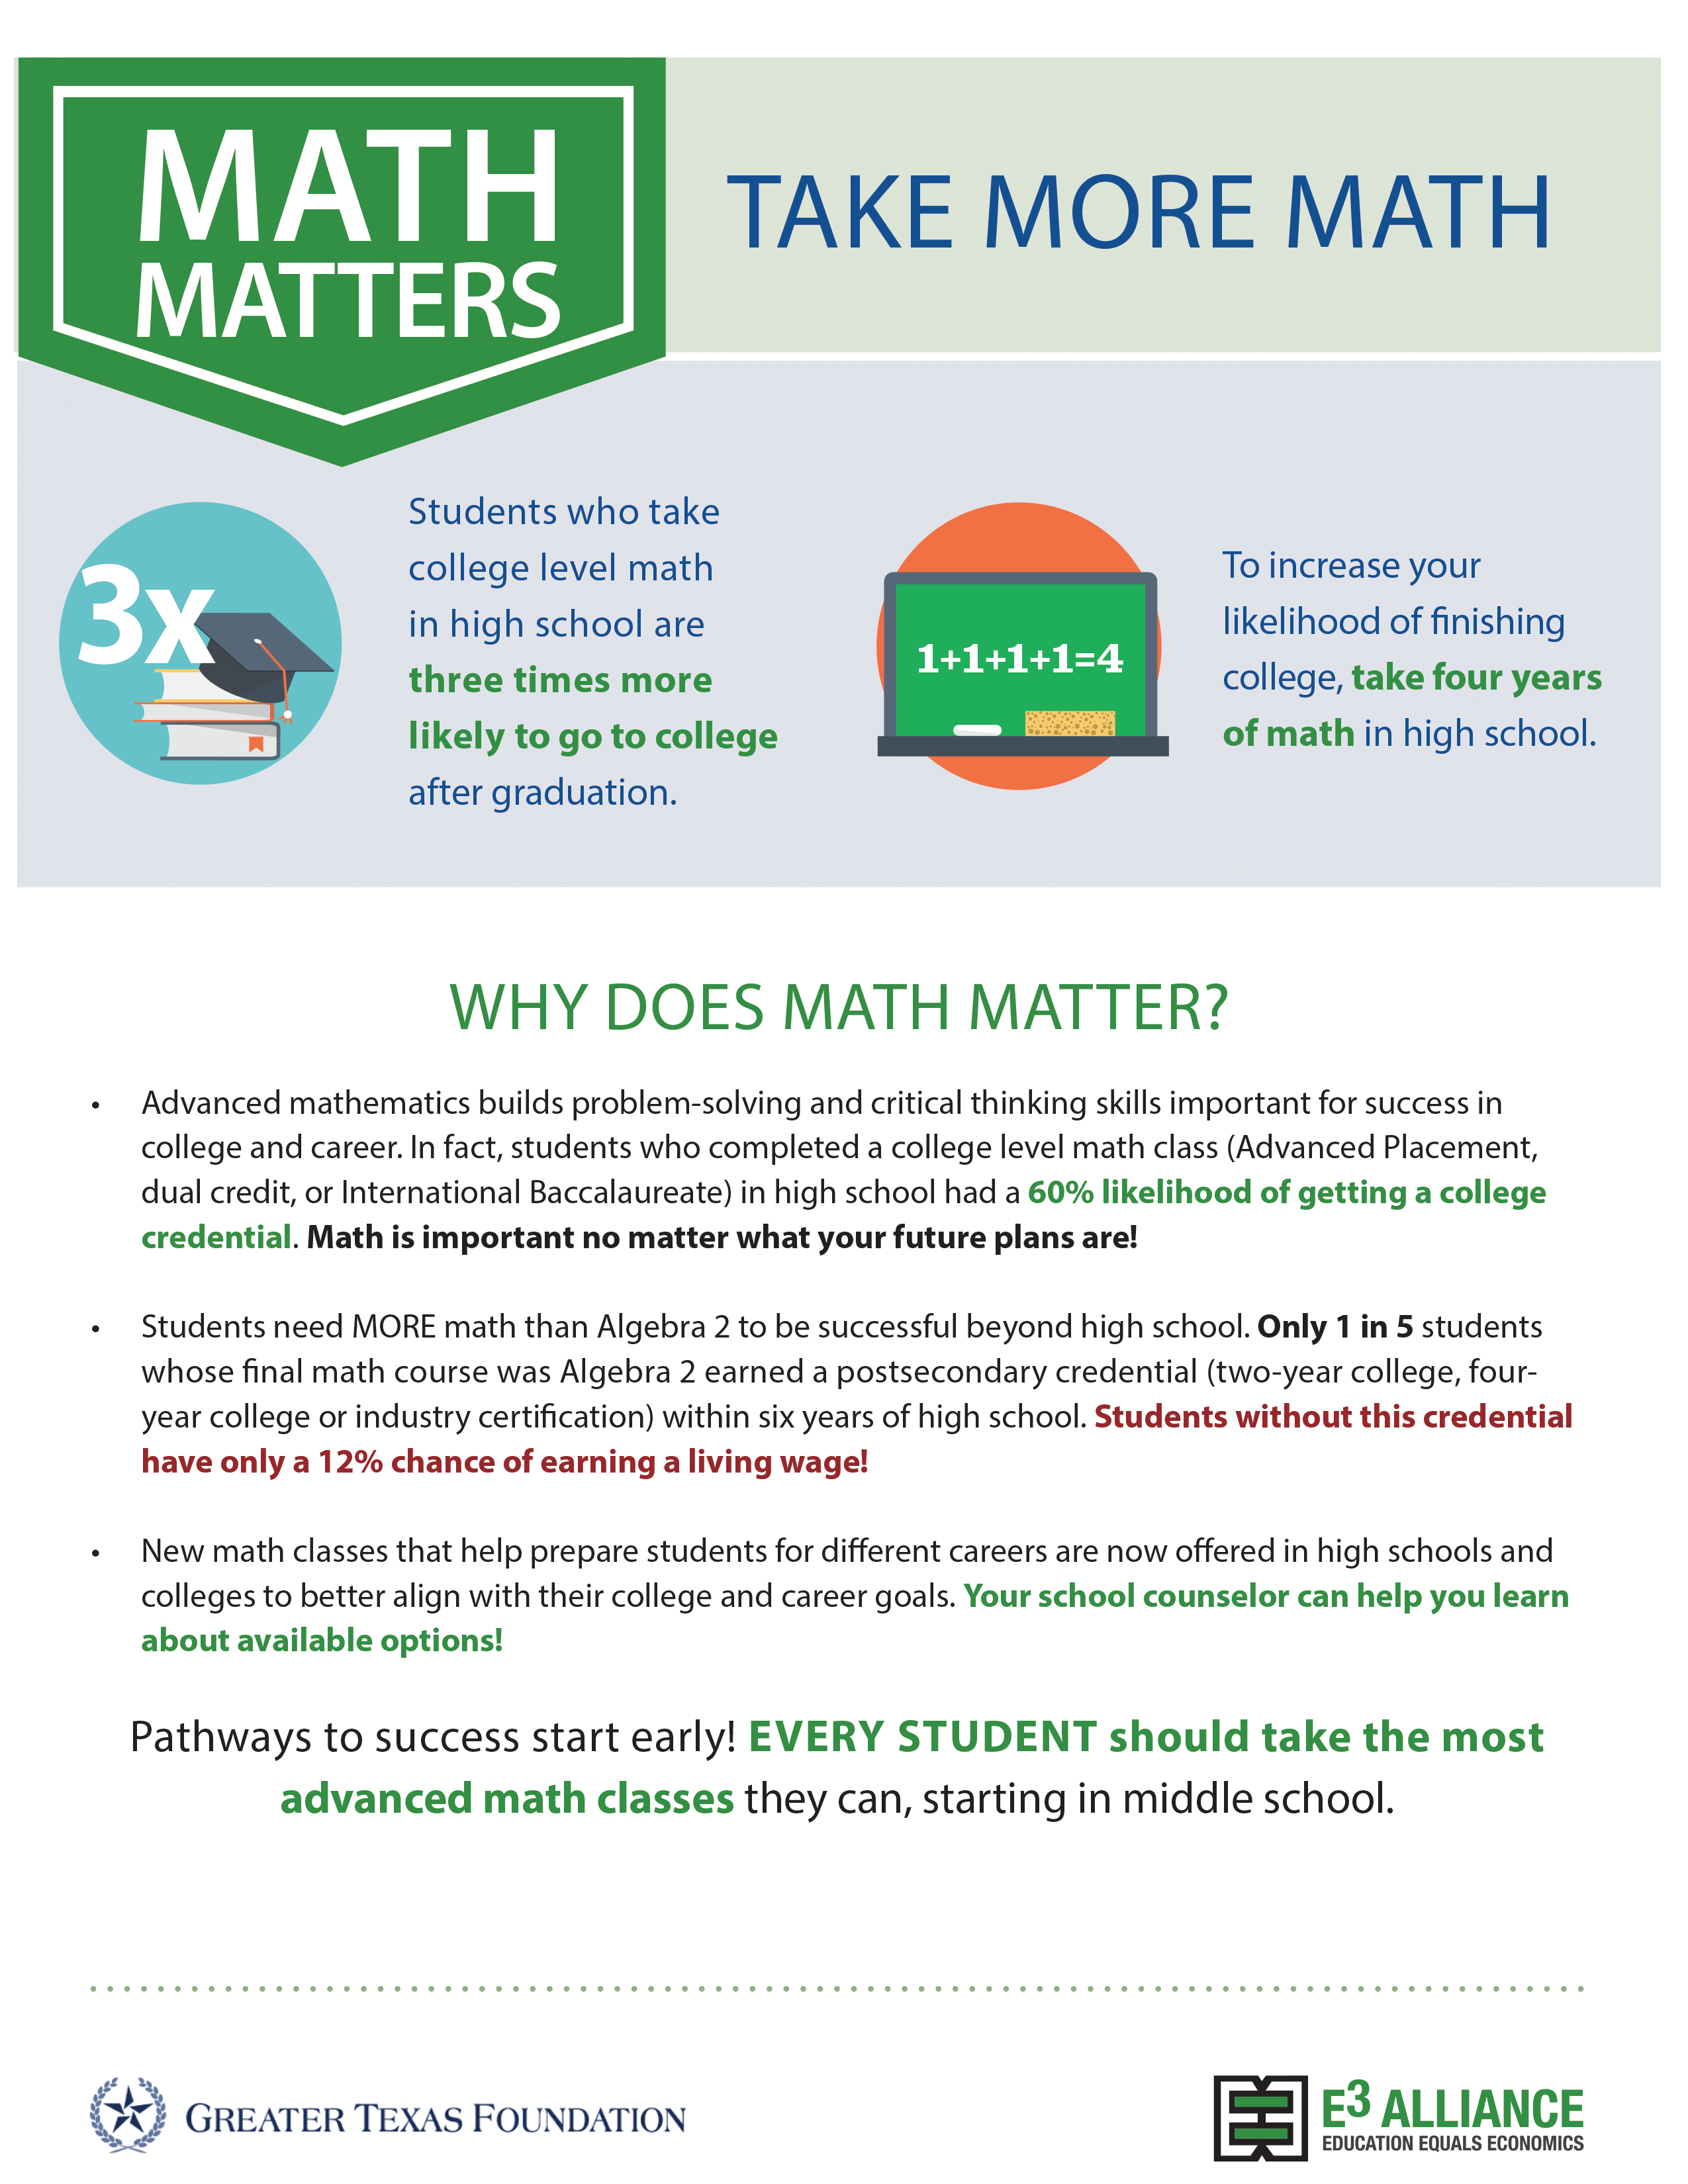 math-matters-for-all-students-e3-alliance